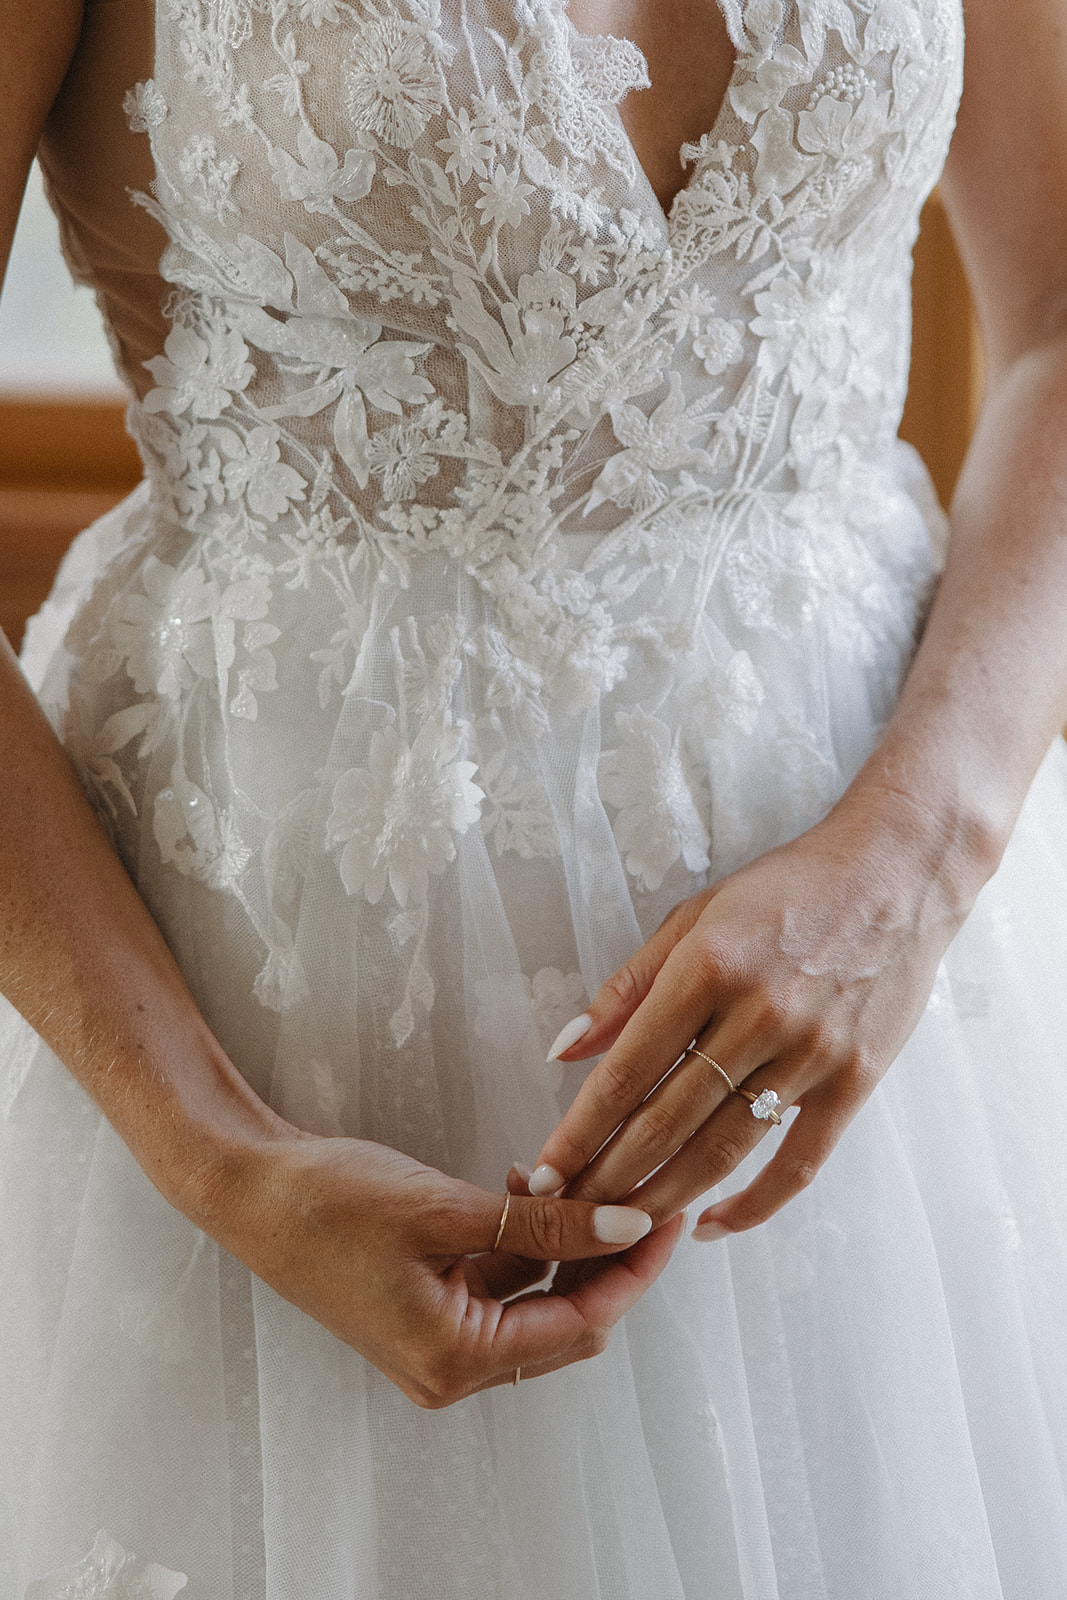 wedding rings on bride against white lace wedding dress